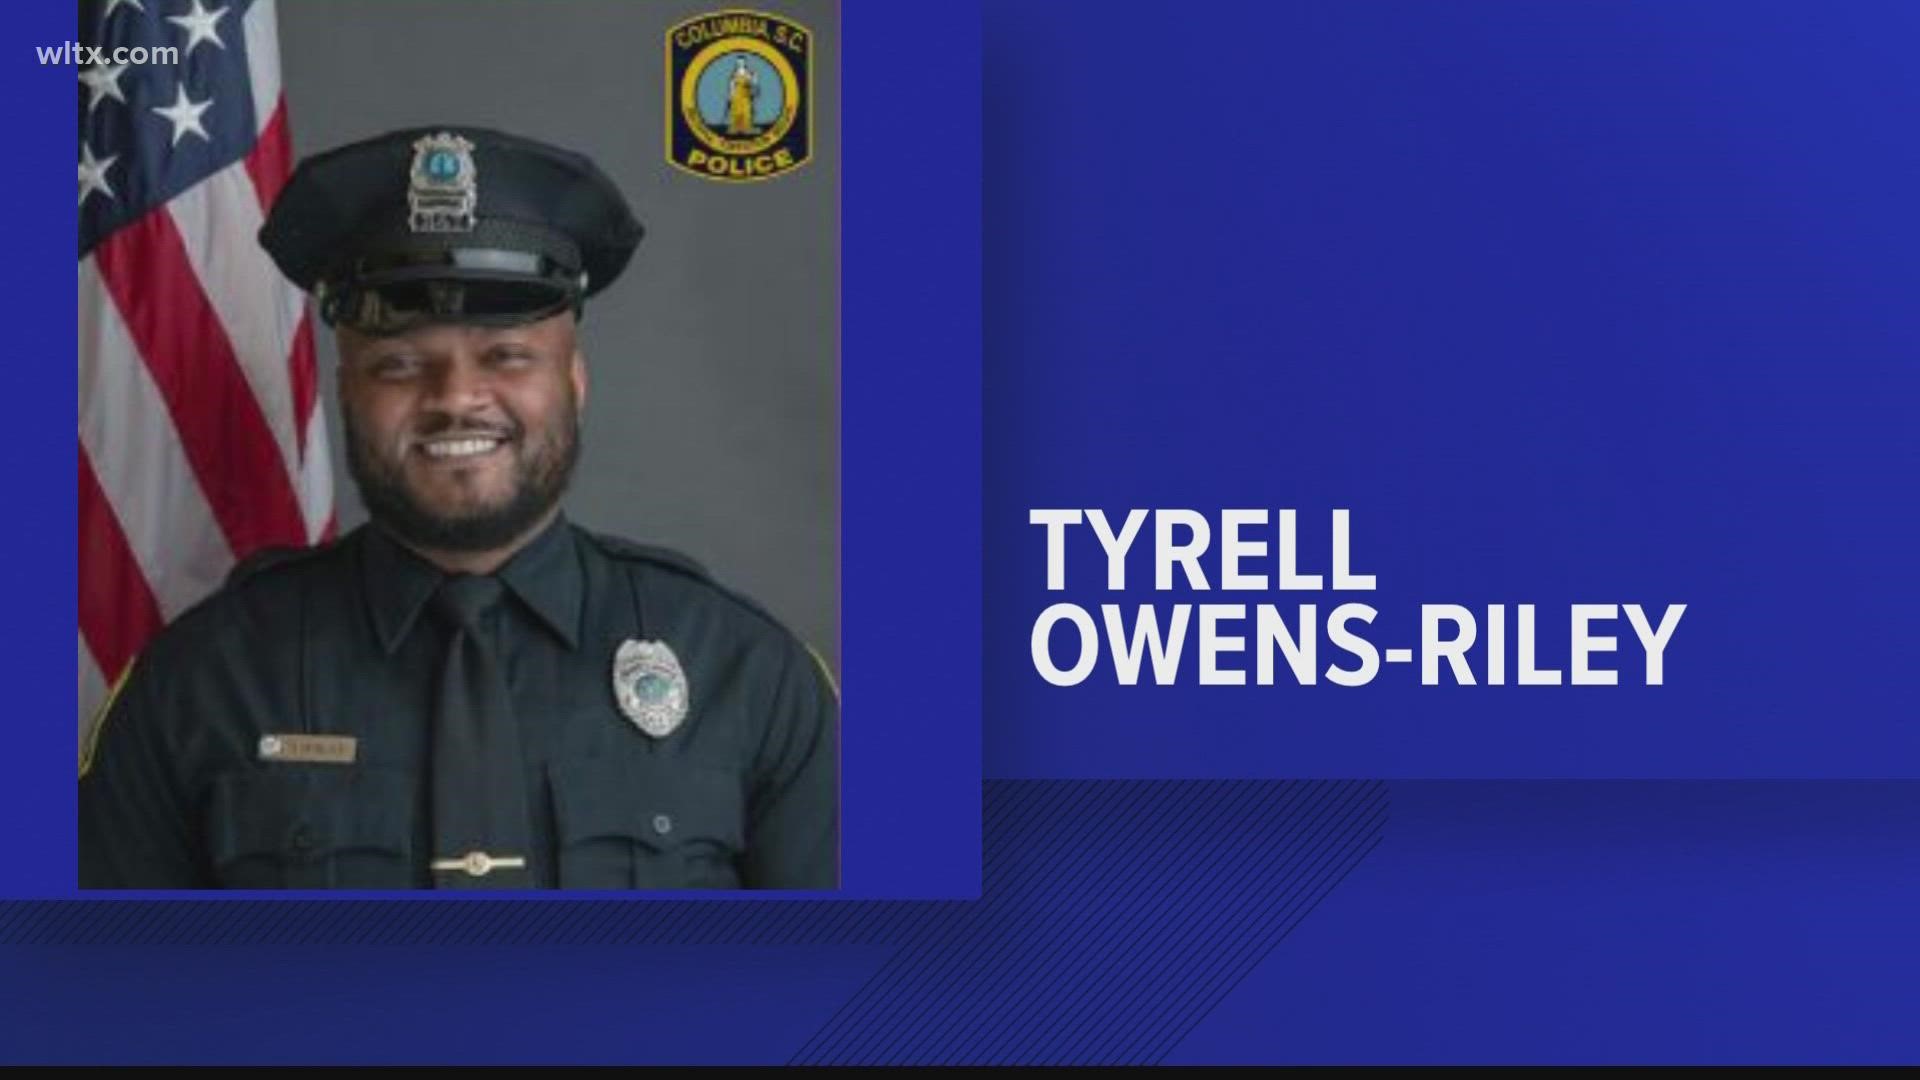 Tyrell Owens-Riley died while during a special weapons assessment.